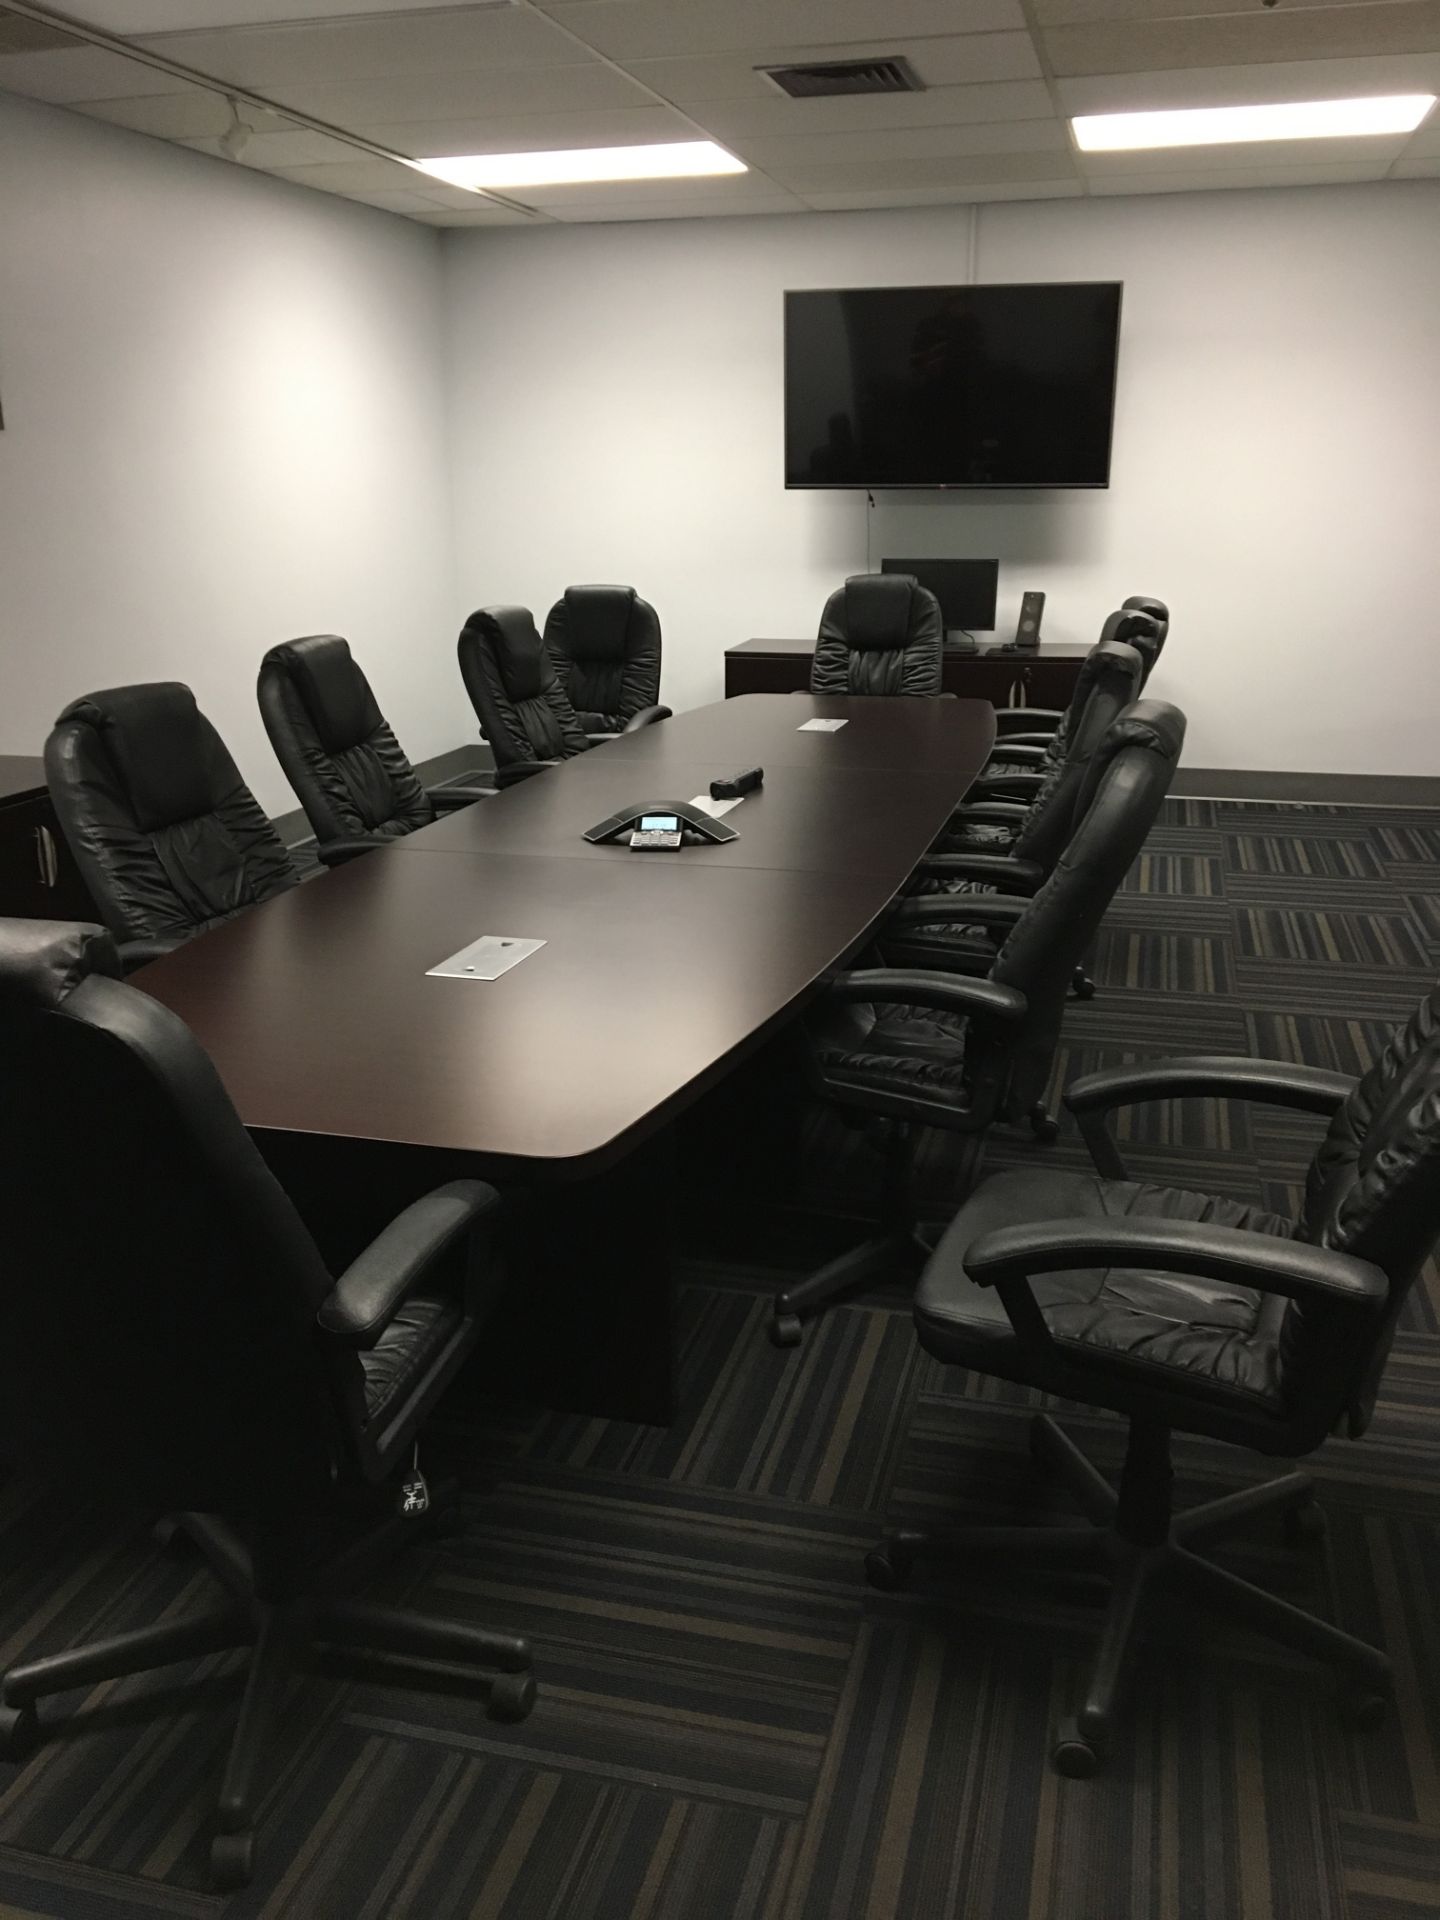 LOT: Contents of Conference Room includes, Conference Table, Chairs, Cabinets, TV